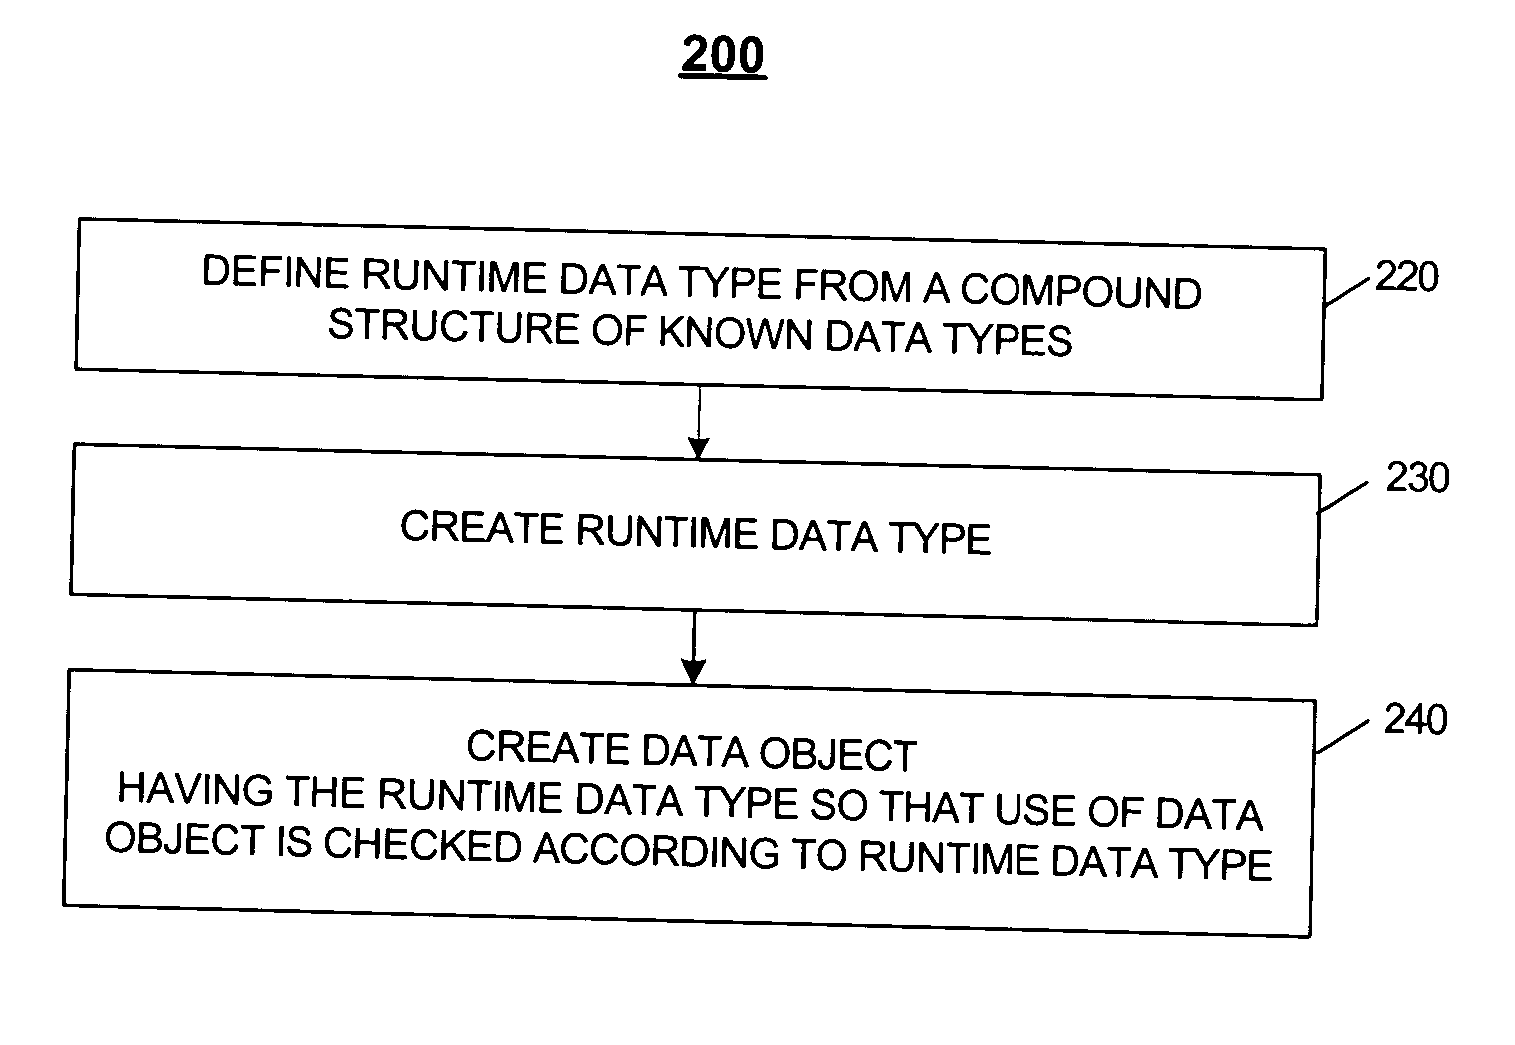 Creating and checking runtime data types